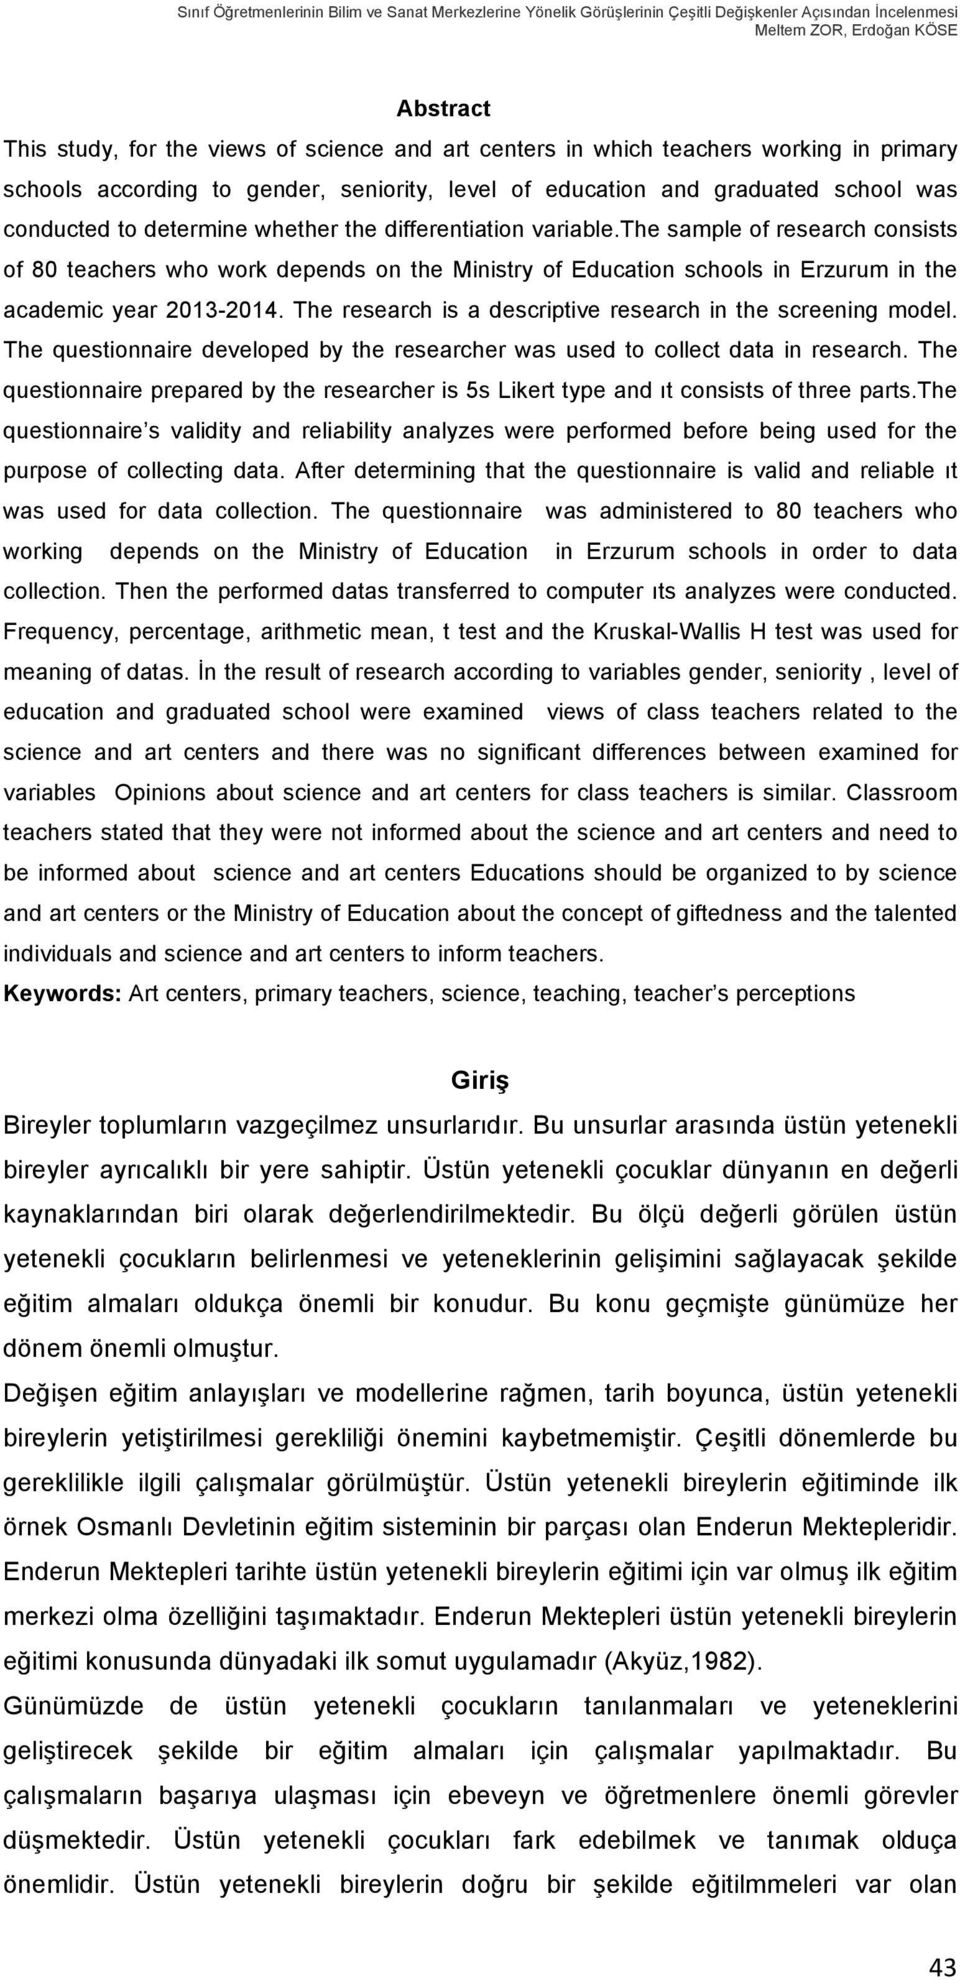 the sample of research consists of 80 teachers who work depends on the Ministry of Education schools in Erzurum in the academic year 2013-2014.